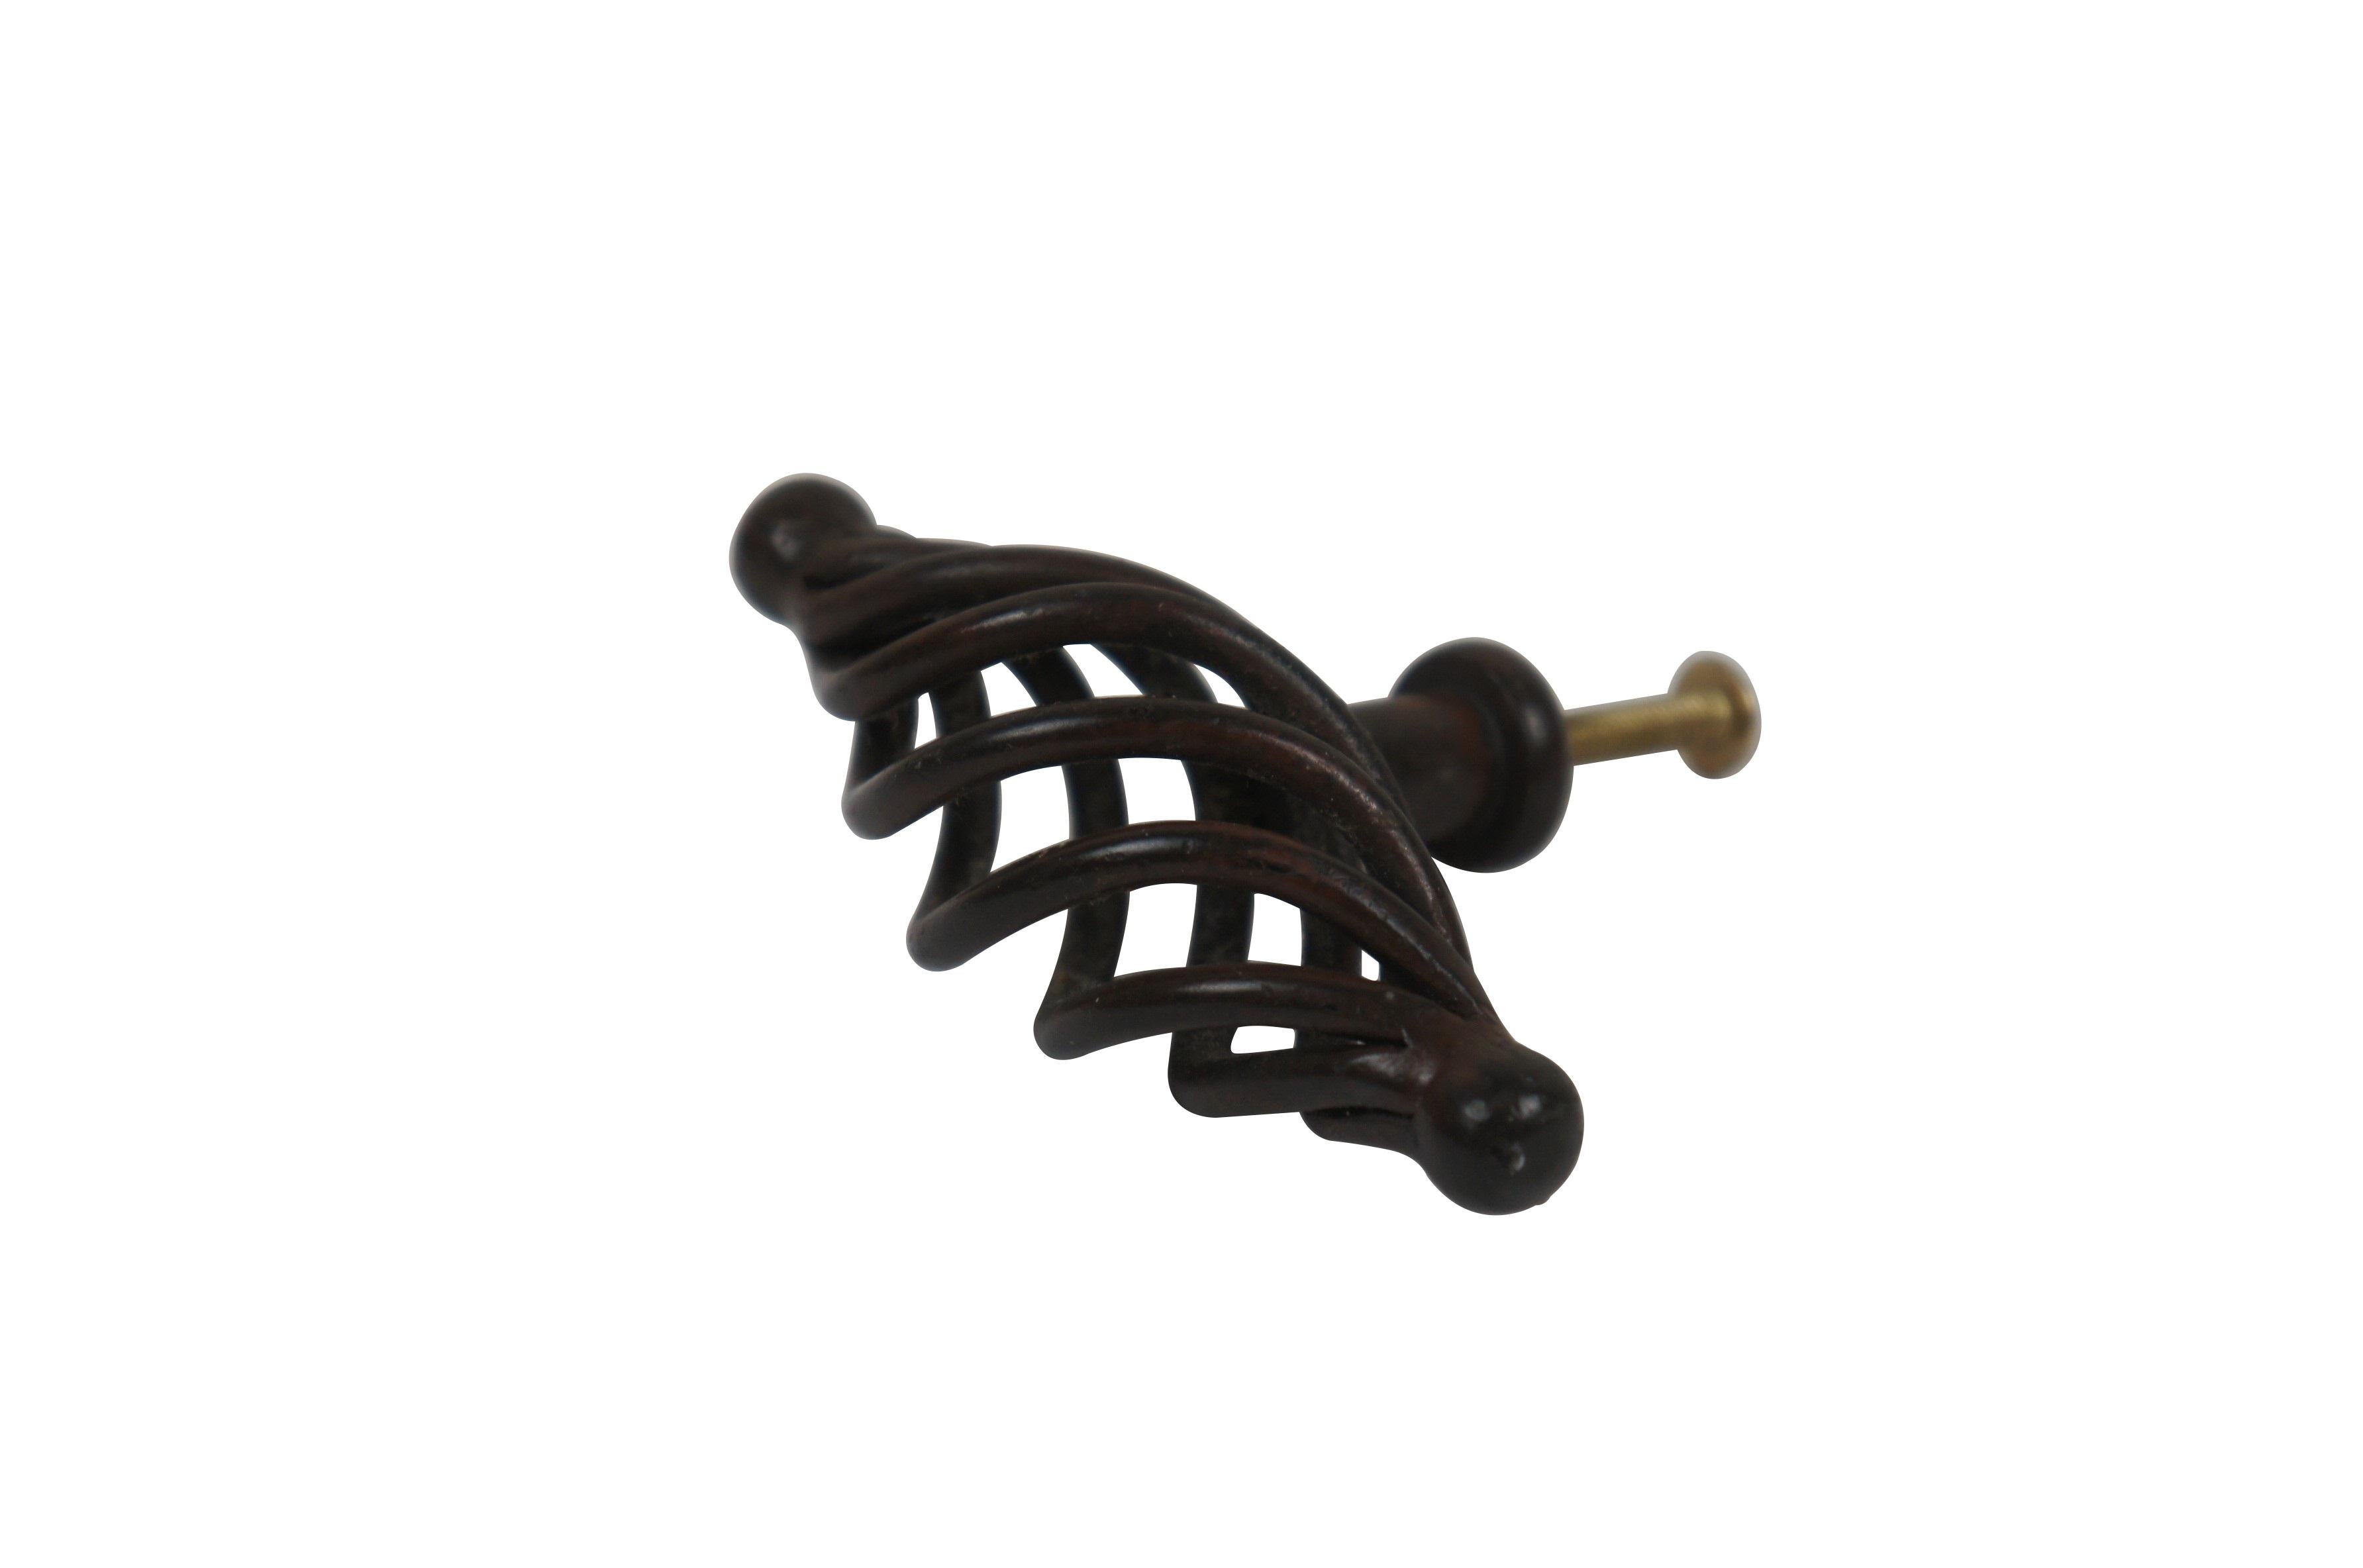 12 Available - Twisted metal oval / oblong birdcage style cabinet / drawer pull / knob, finished in deep brown / dark bronze. 

Dimensions:
3.5